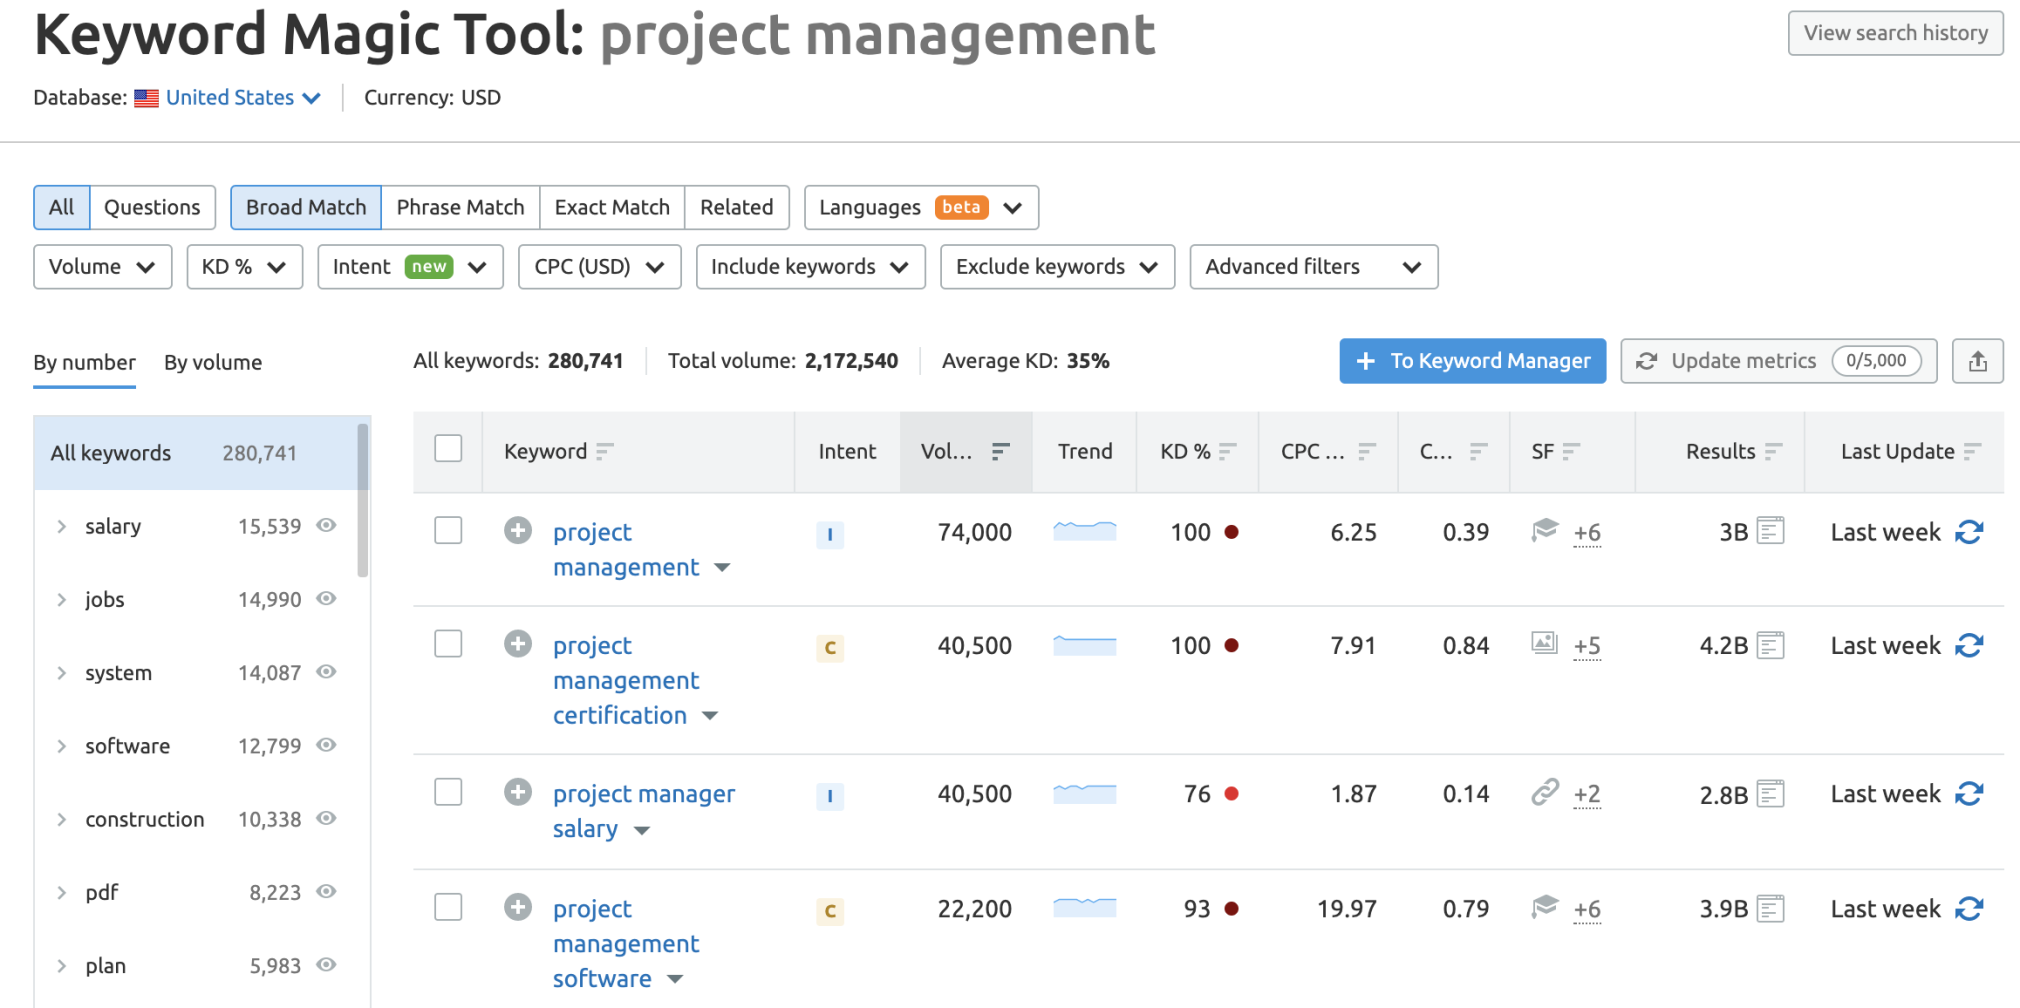 Keyword Magic Tool results for project management